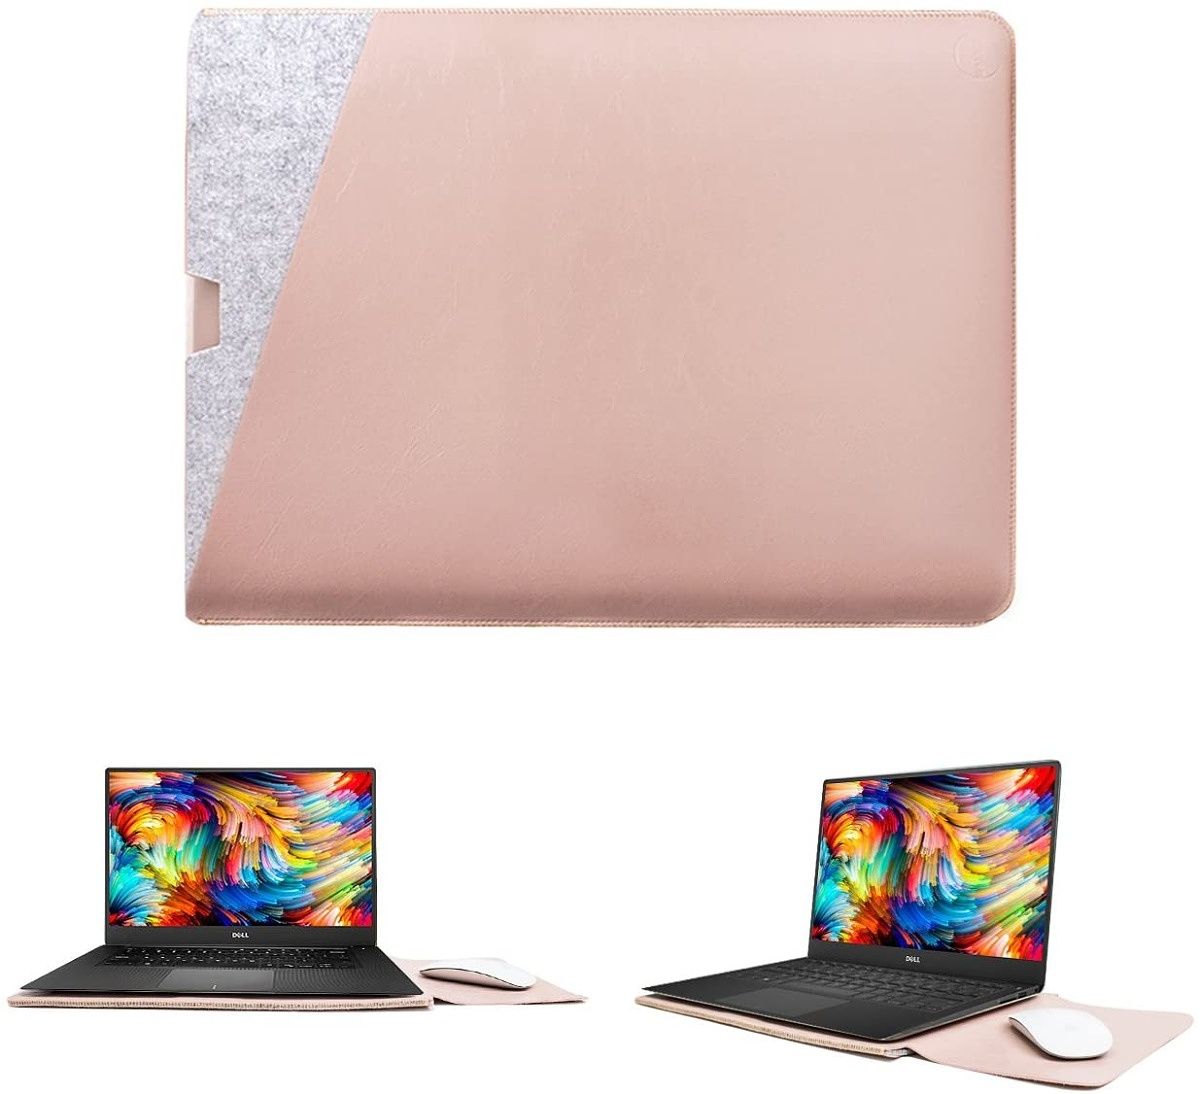 This slim sleeve doesn't just protect your laptop when you're taking it with you. The opening flap is extra large so you can use it as a mousepad too. It's great for those who never travel without an external mouse.